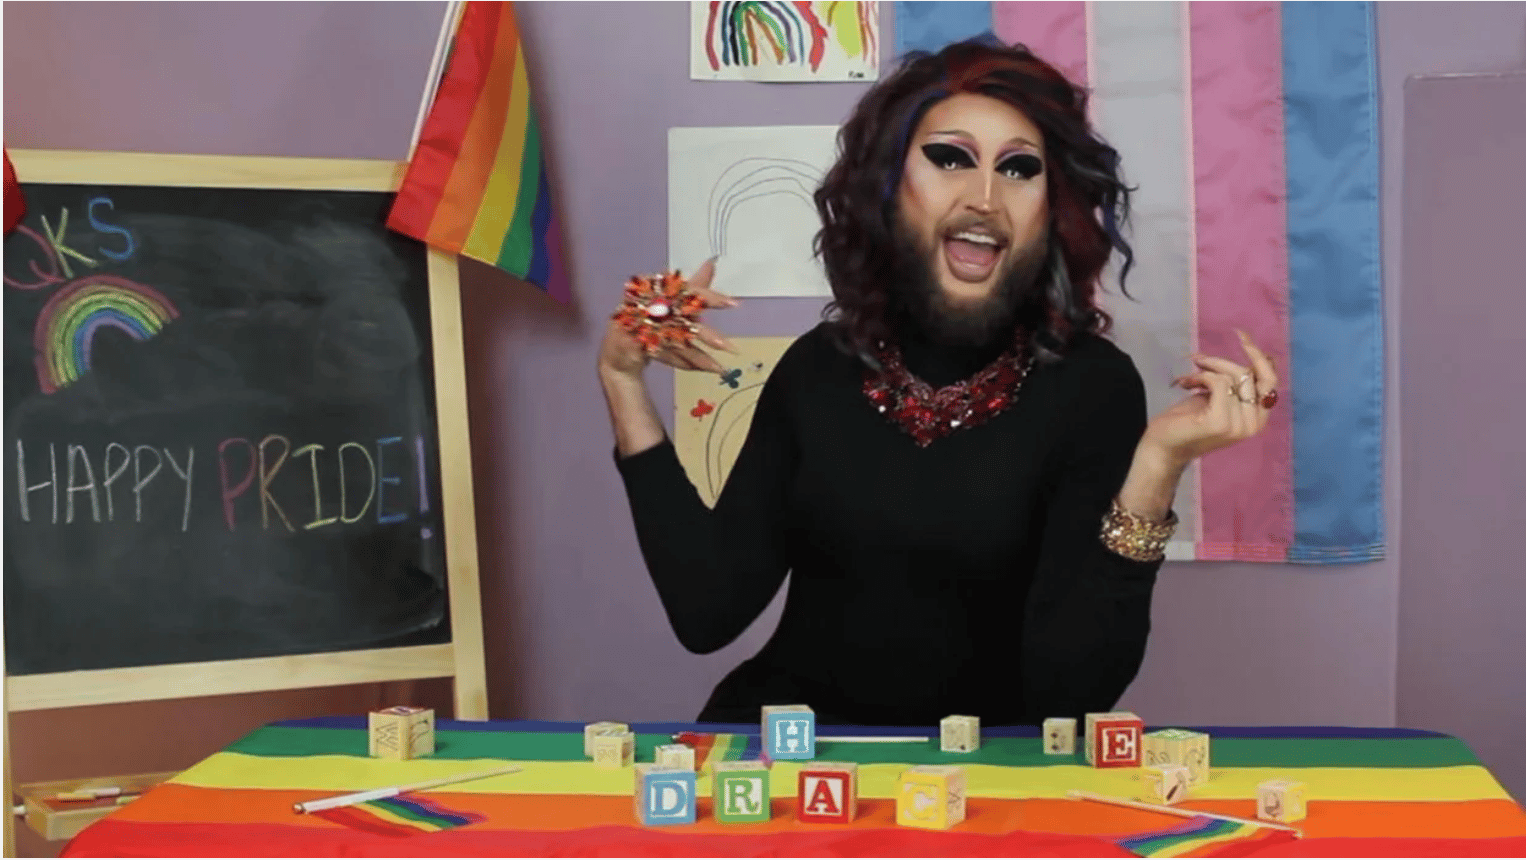 YouTube Kids defends videos featuring drag queens and LGBT+ content targeting children